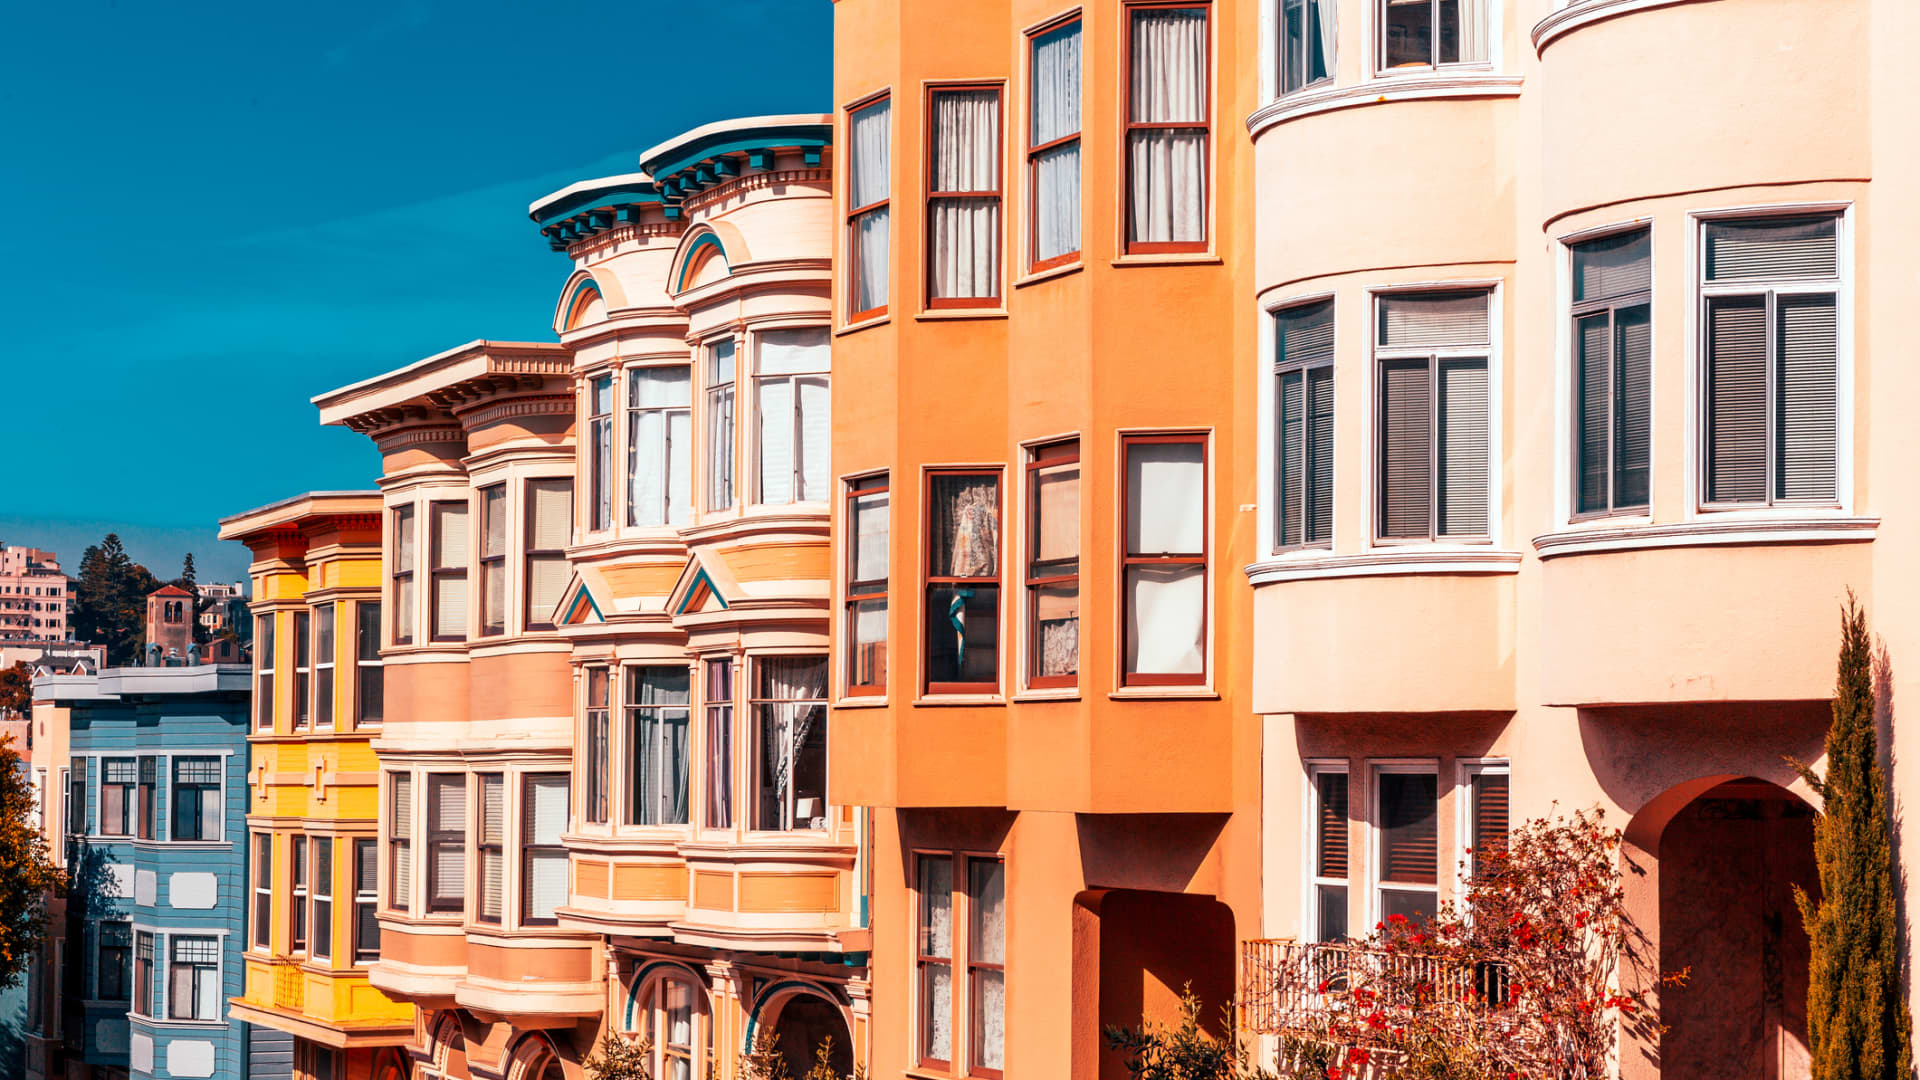 California ranked as the state with the second highest average rent, according to doxo.